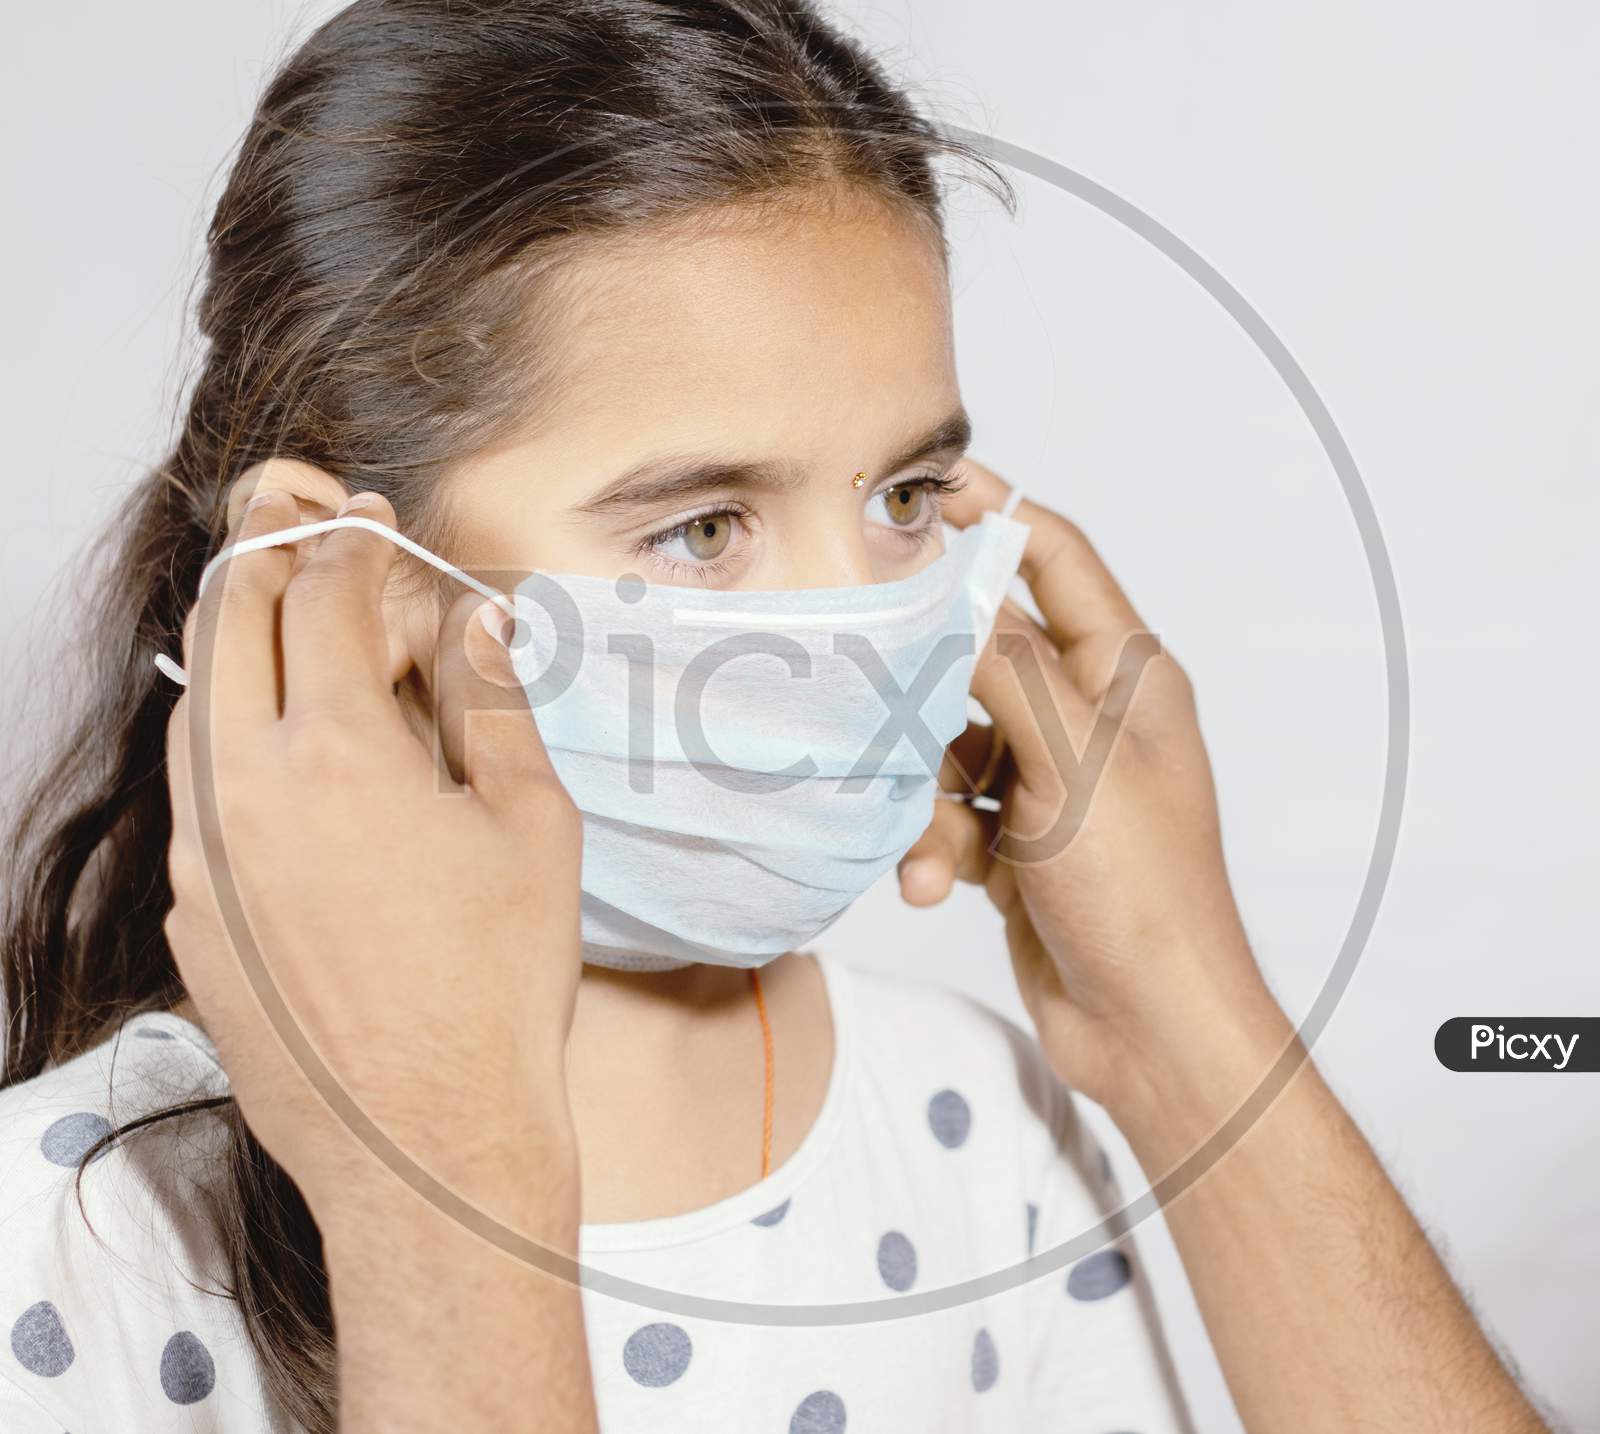 Prevention Of Spreading The Coronavirus Or Covid-19 Outbreak By Wearing Mask - Father Wearing A Disposable Hygienic Face Mask To His Young Girl Daughter To Protect Spread Of Disease.